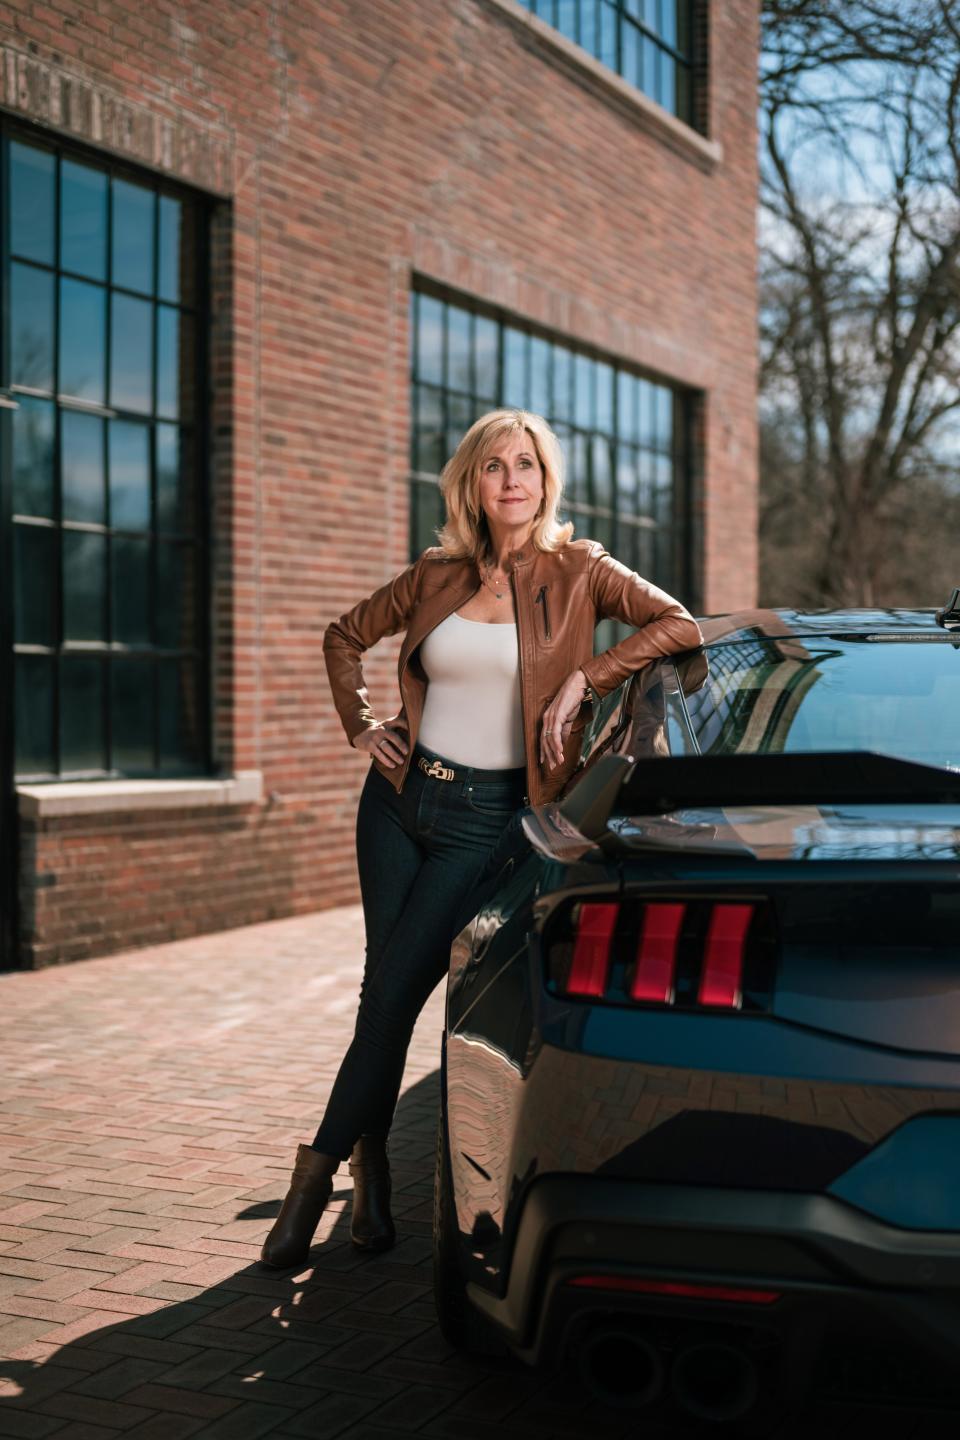 Laurie Transou, chief engineer of the Ford Mustang program, is launching the 2024 edition. She is seen here on March 26, 2023 at Phoenix Mills in Plymouth.